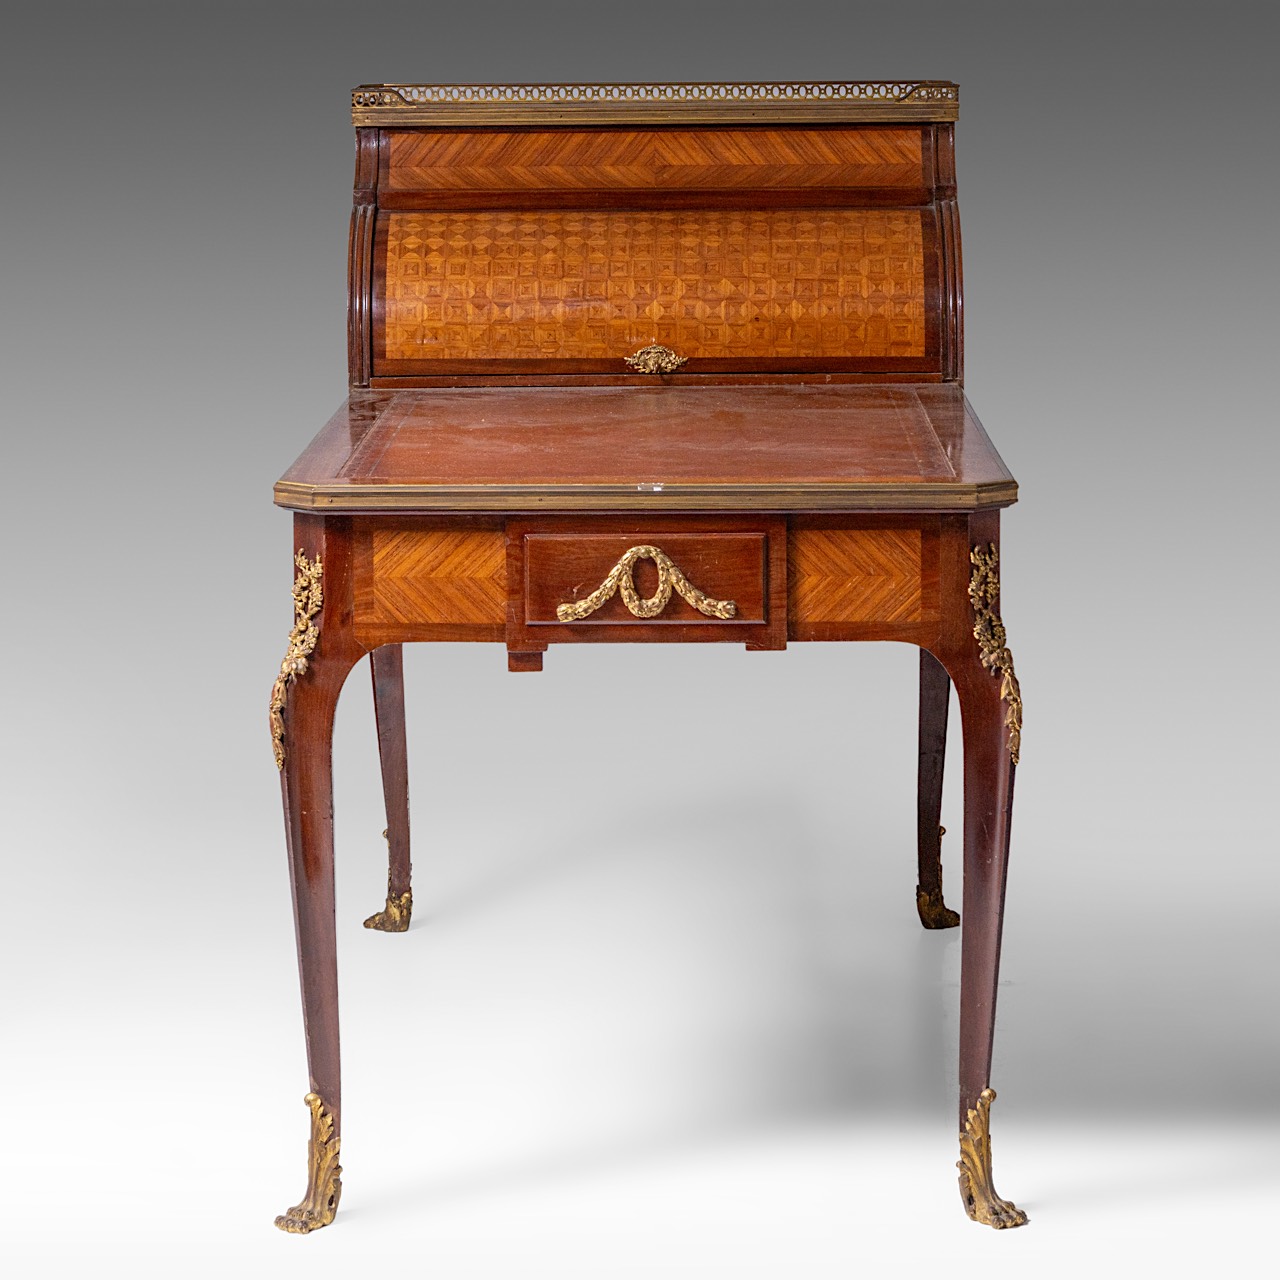 A leather-topped Transitional-style bureau plat and rolltop desk with parquetry and gilt bronze moun - Image 4 of 9